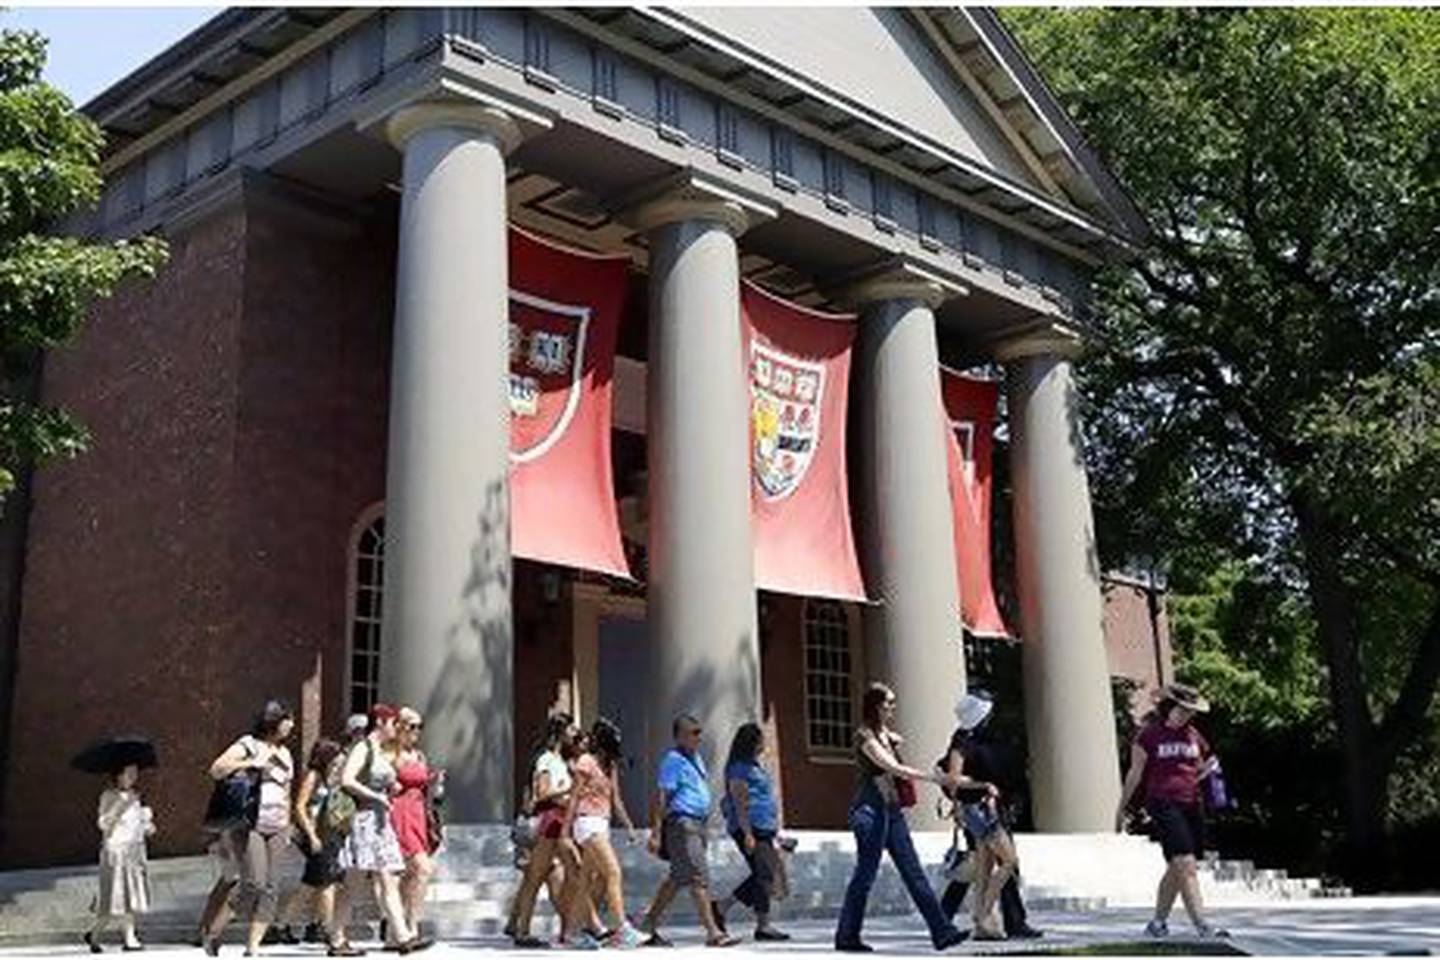 Flags hang in Harvard Yard bearing the university's slogan, Veritas, which is the Latin word for "truth". Sipa Press / Rex Features